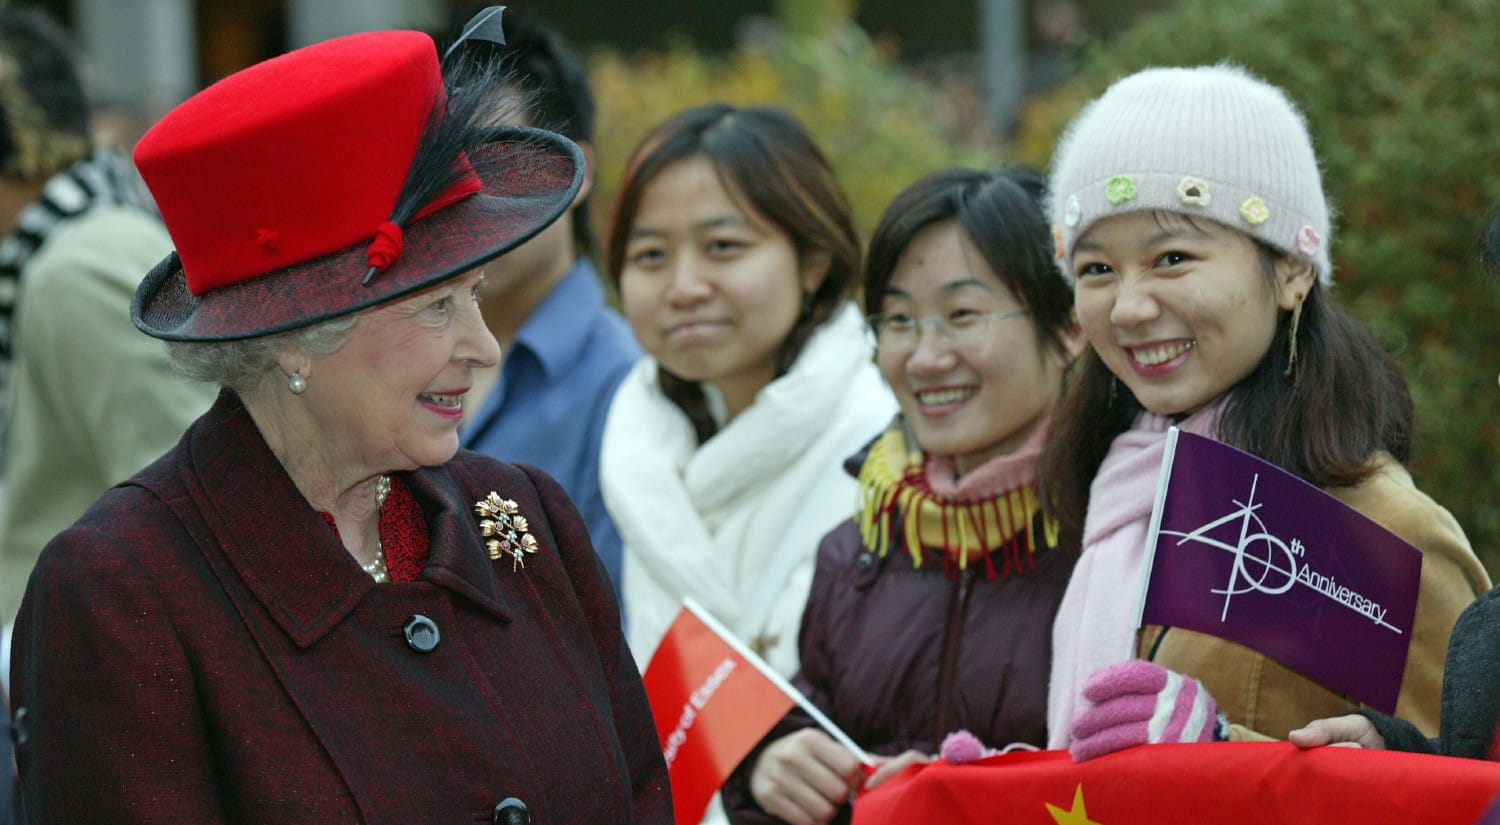 Her Majesty the Queen meets students at Colchester Campus